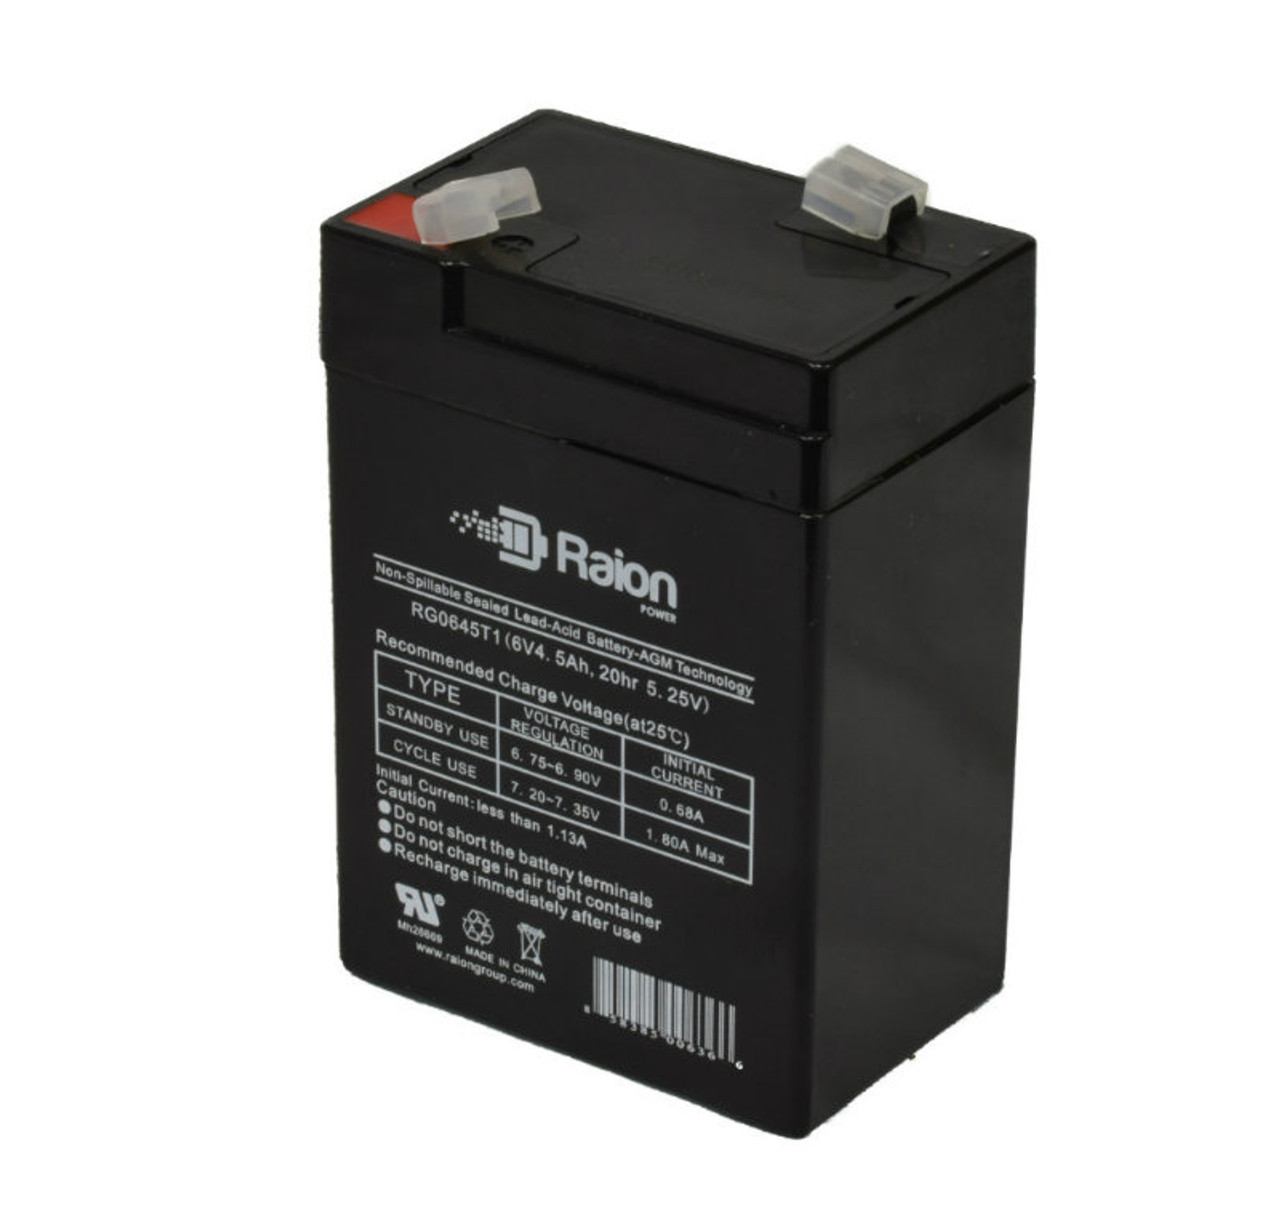 Raion Power RG0645T1 6V 4.5Ah Replacement Battery Cartridge for Edwards 1663B